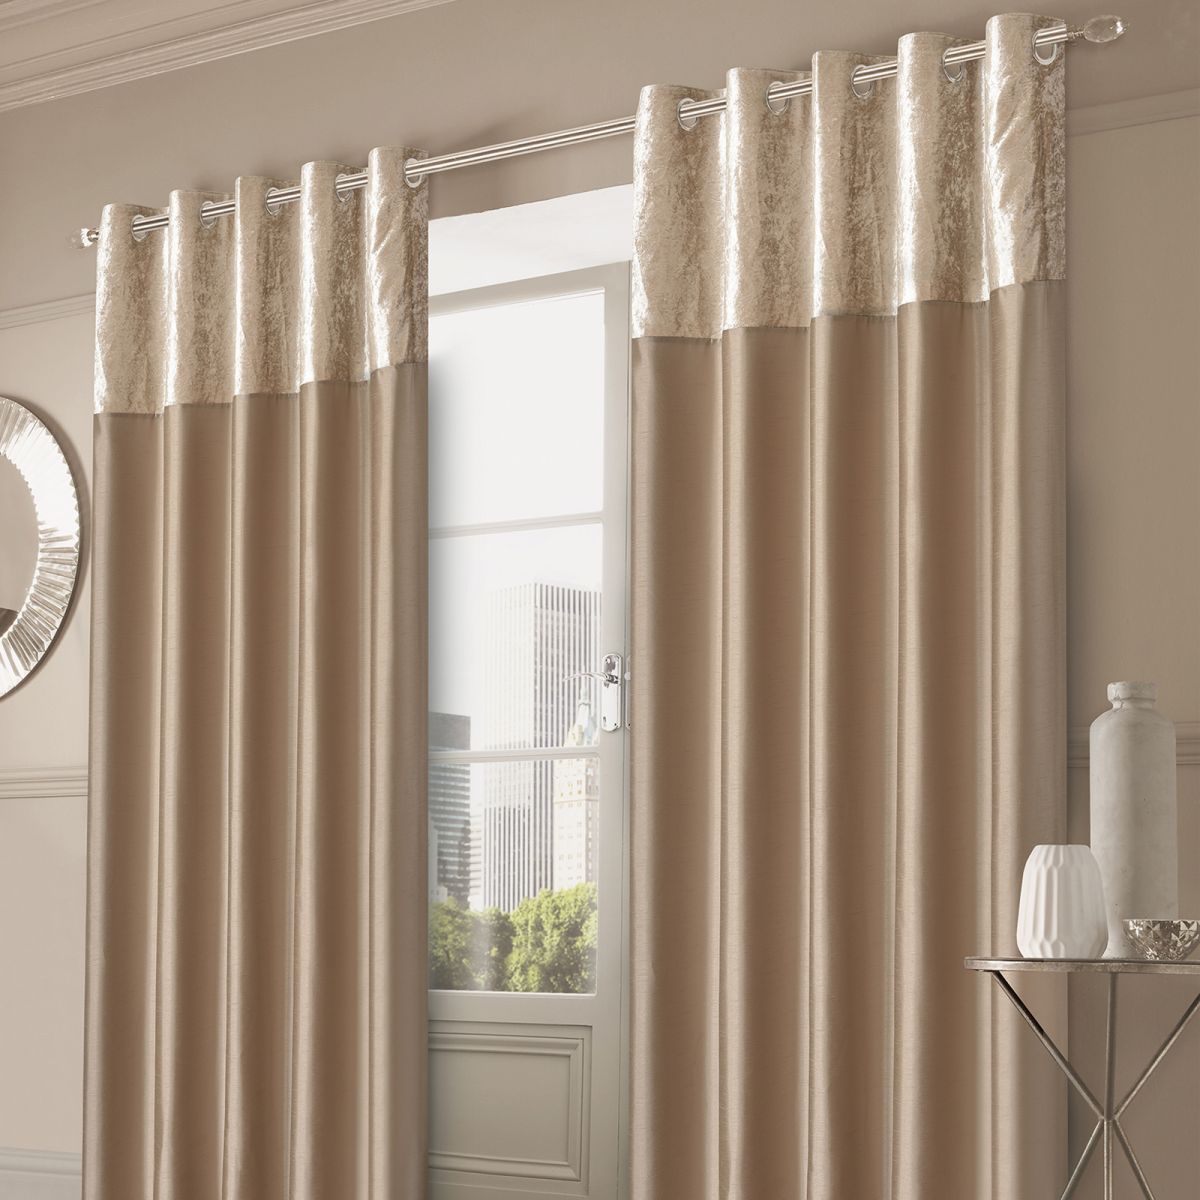 Sienna Home Crushed Velvet Band Eyelet Curtains, Gold - 46"x54"